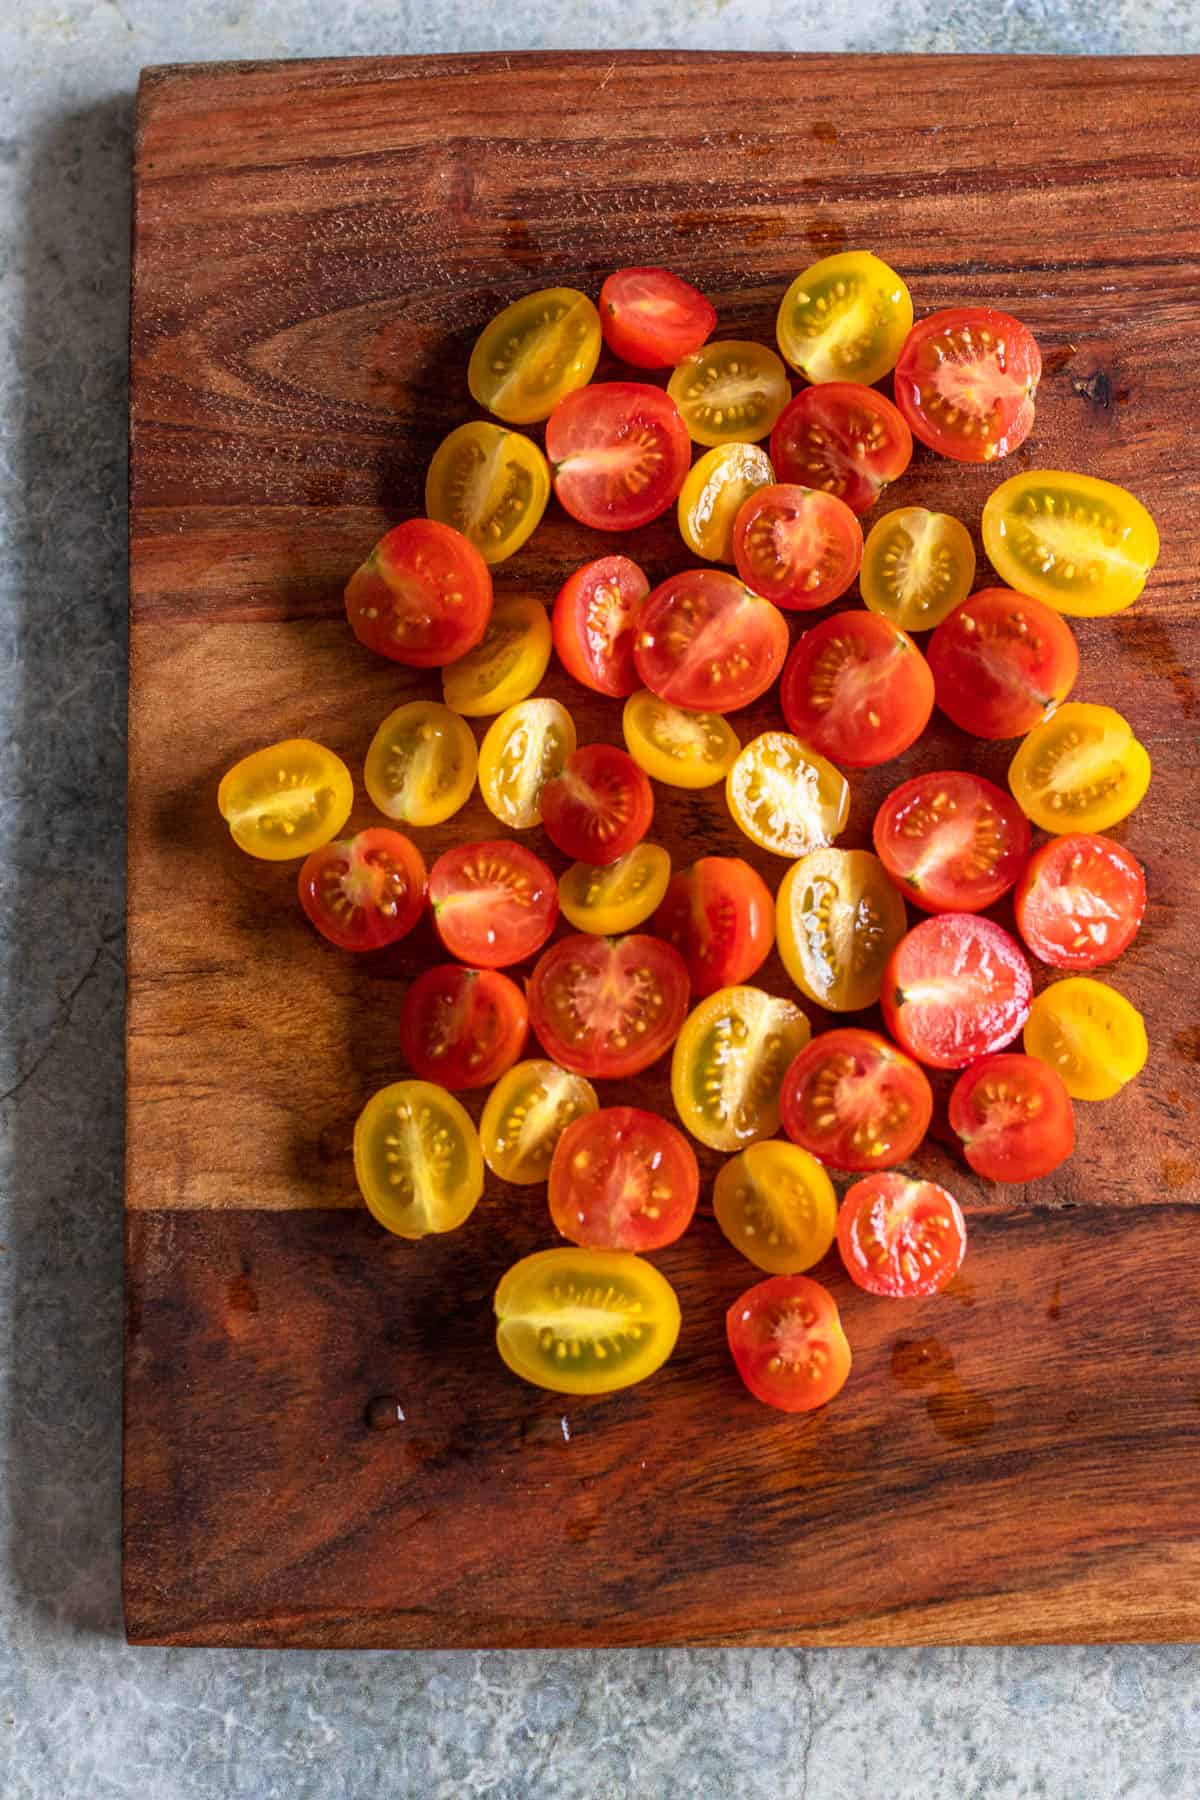 cherry tomatoes cut in half on a wooden cutting board